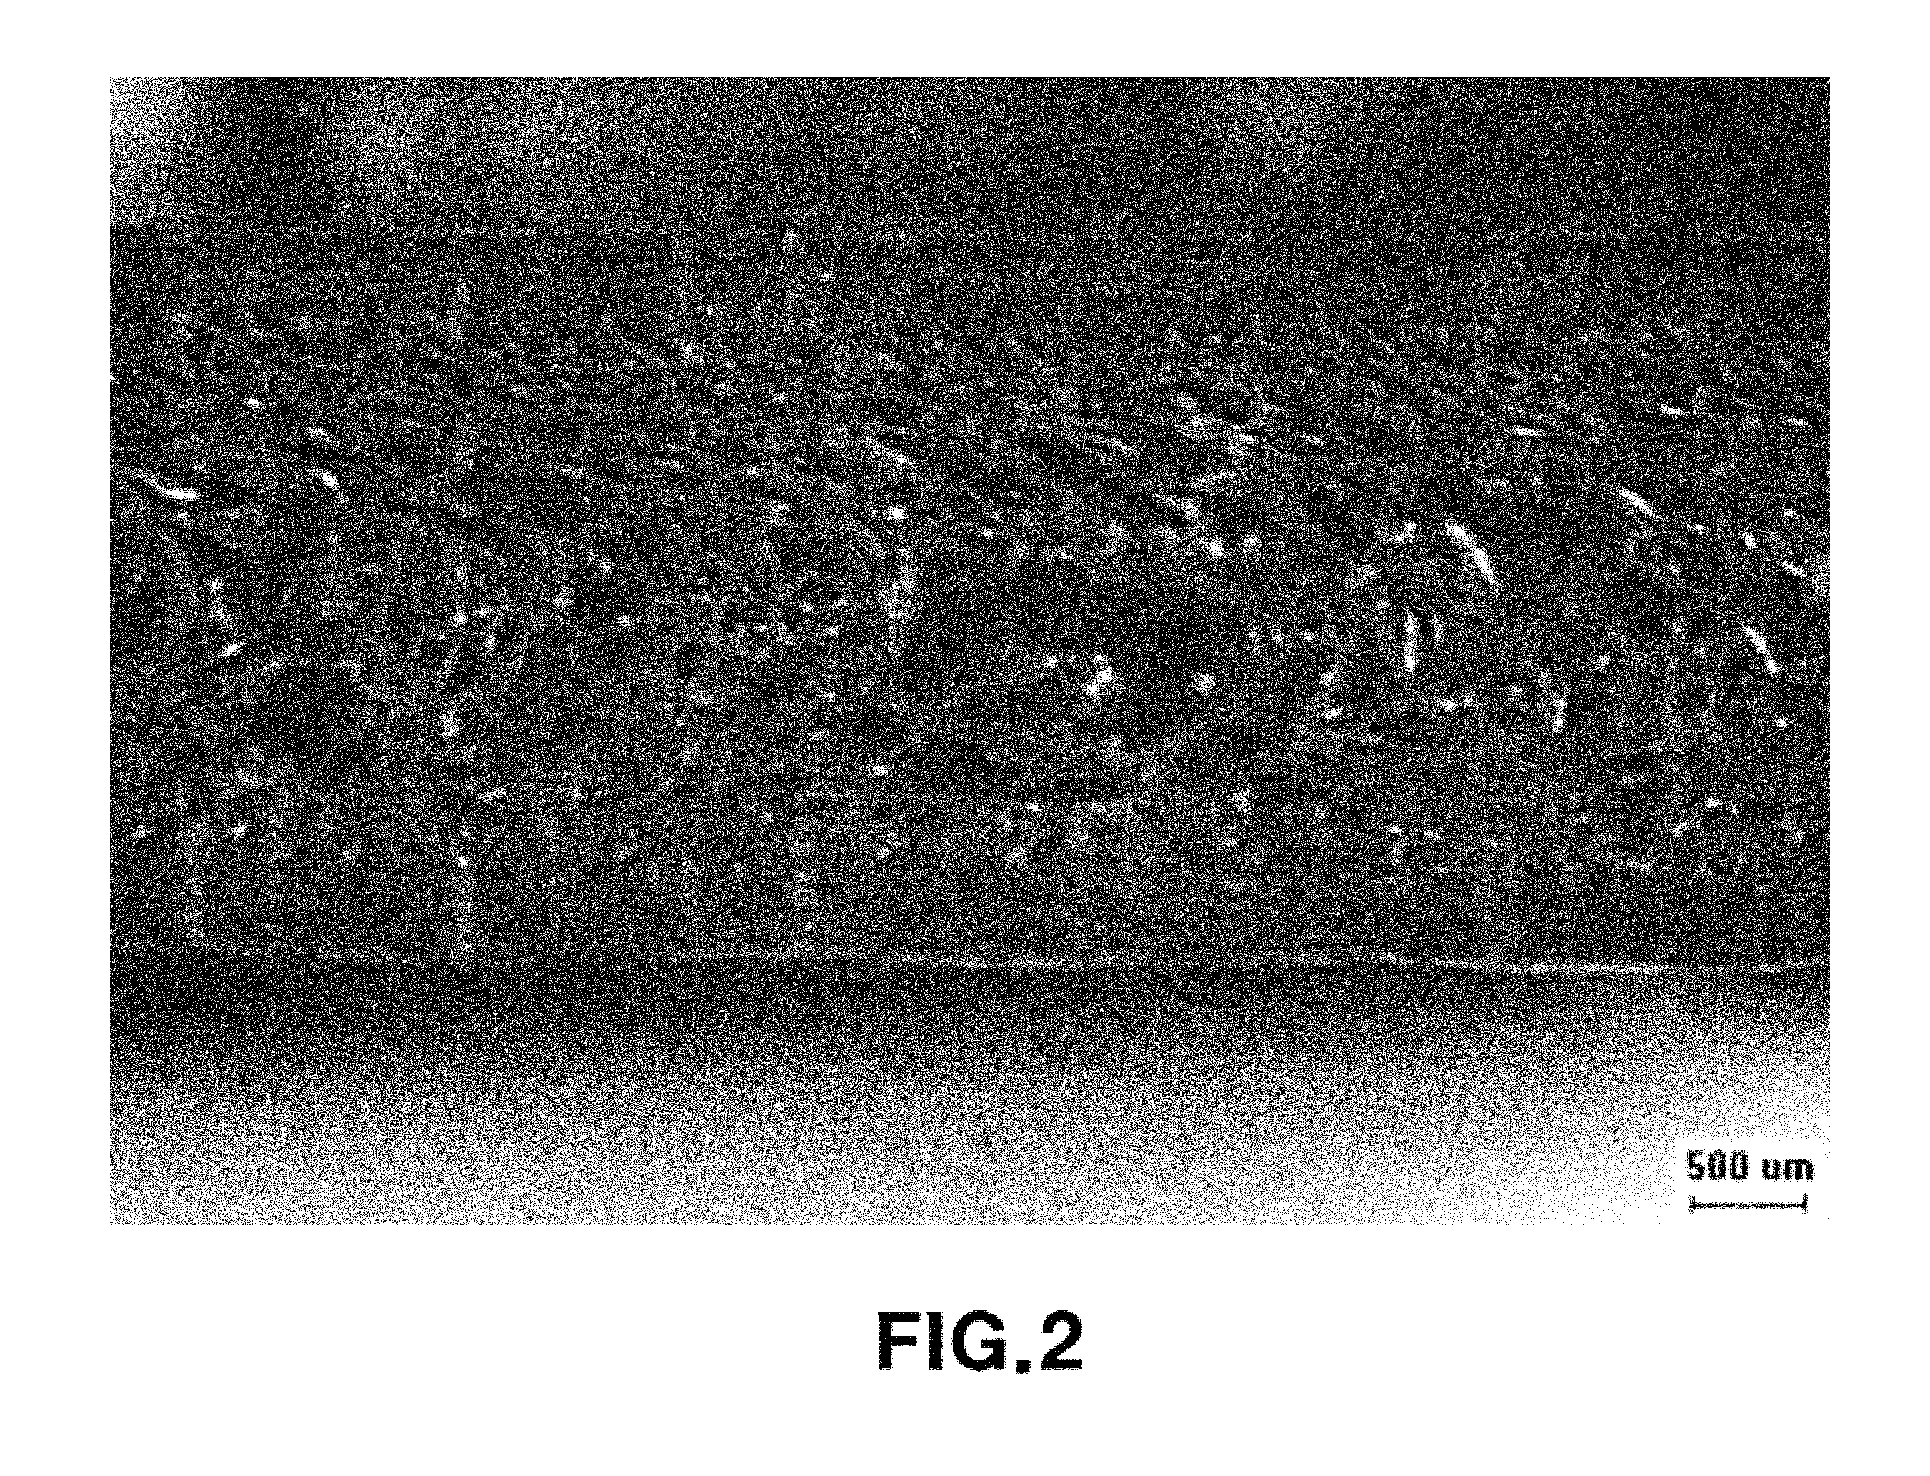 Polypropylene-based resin composition and method for manufacturing polypropylene composite material